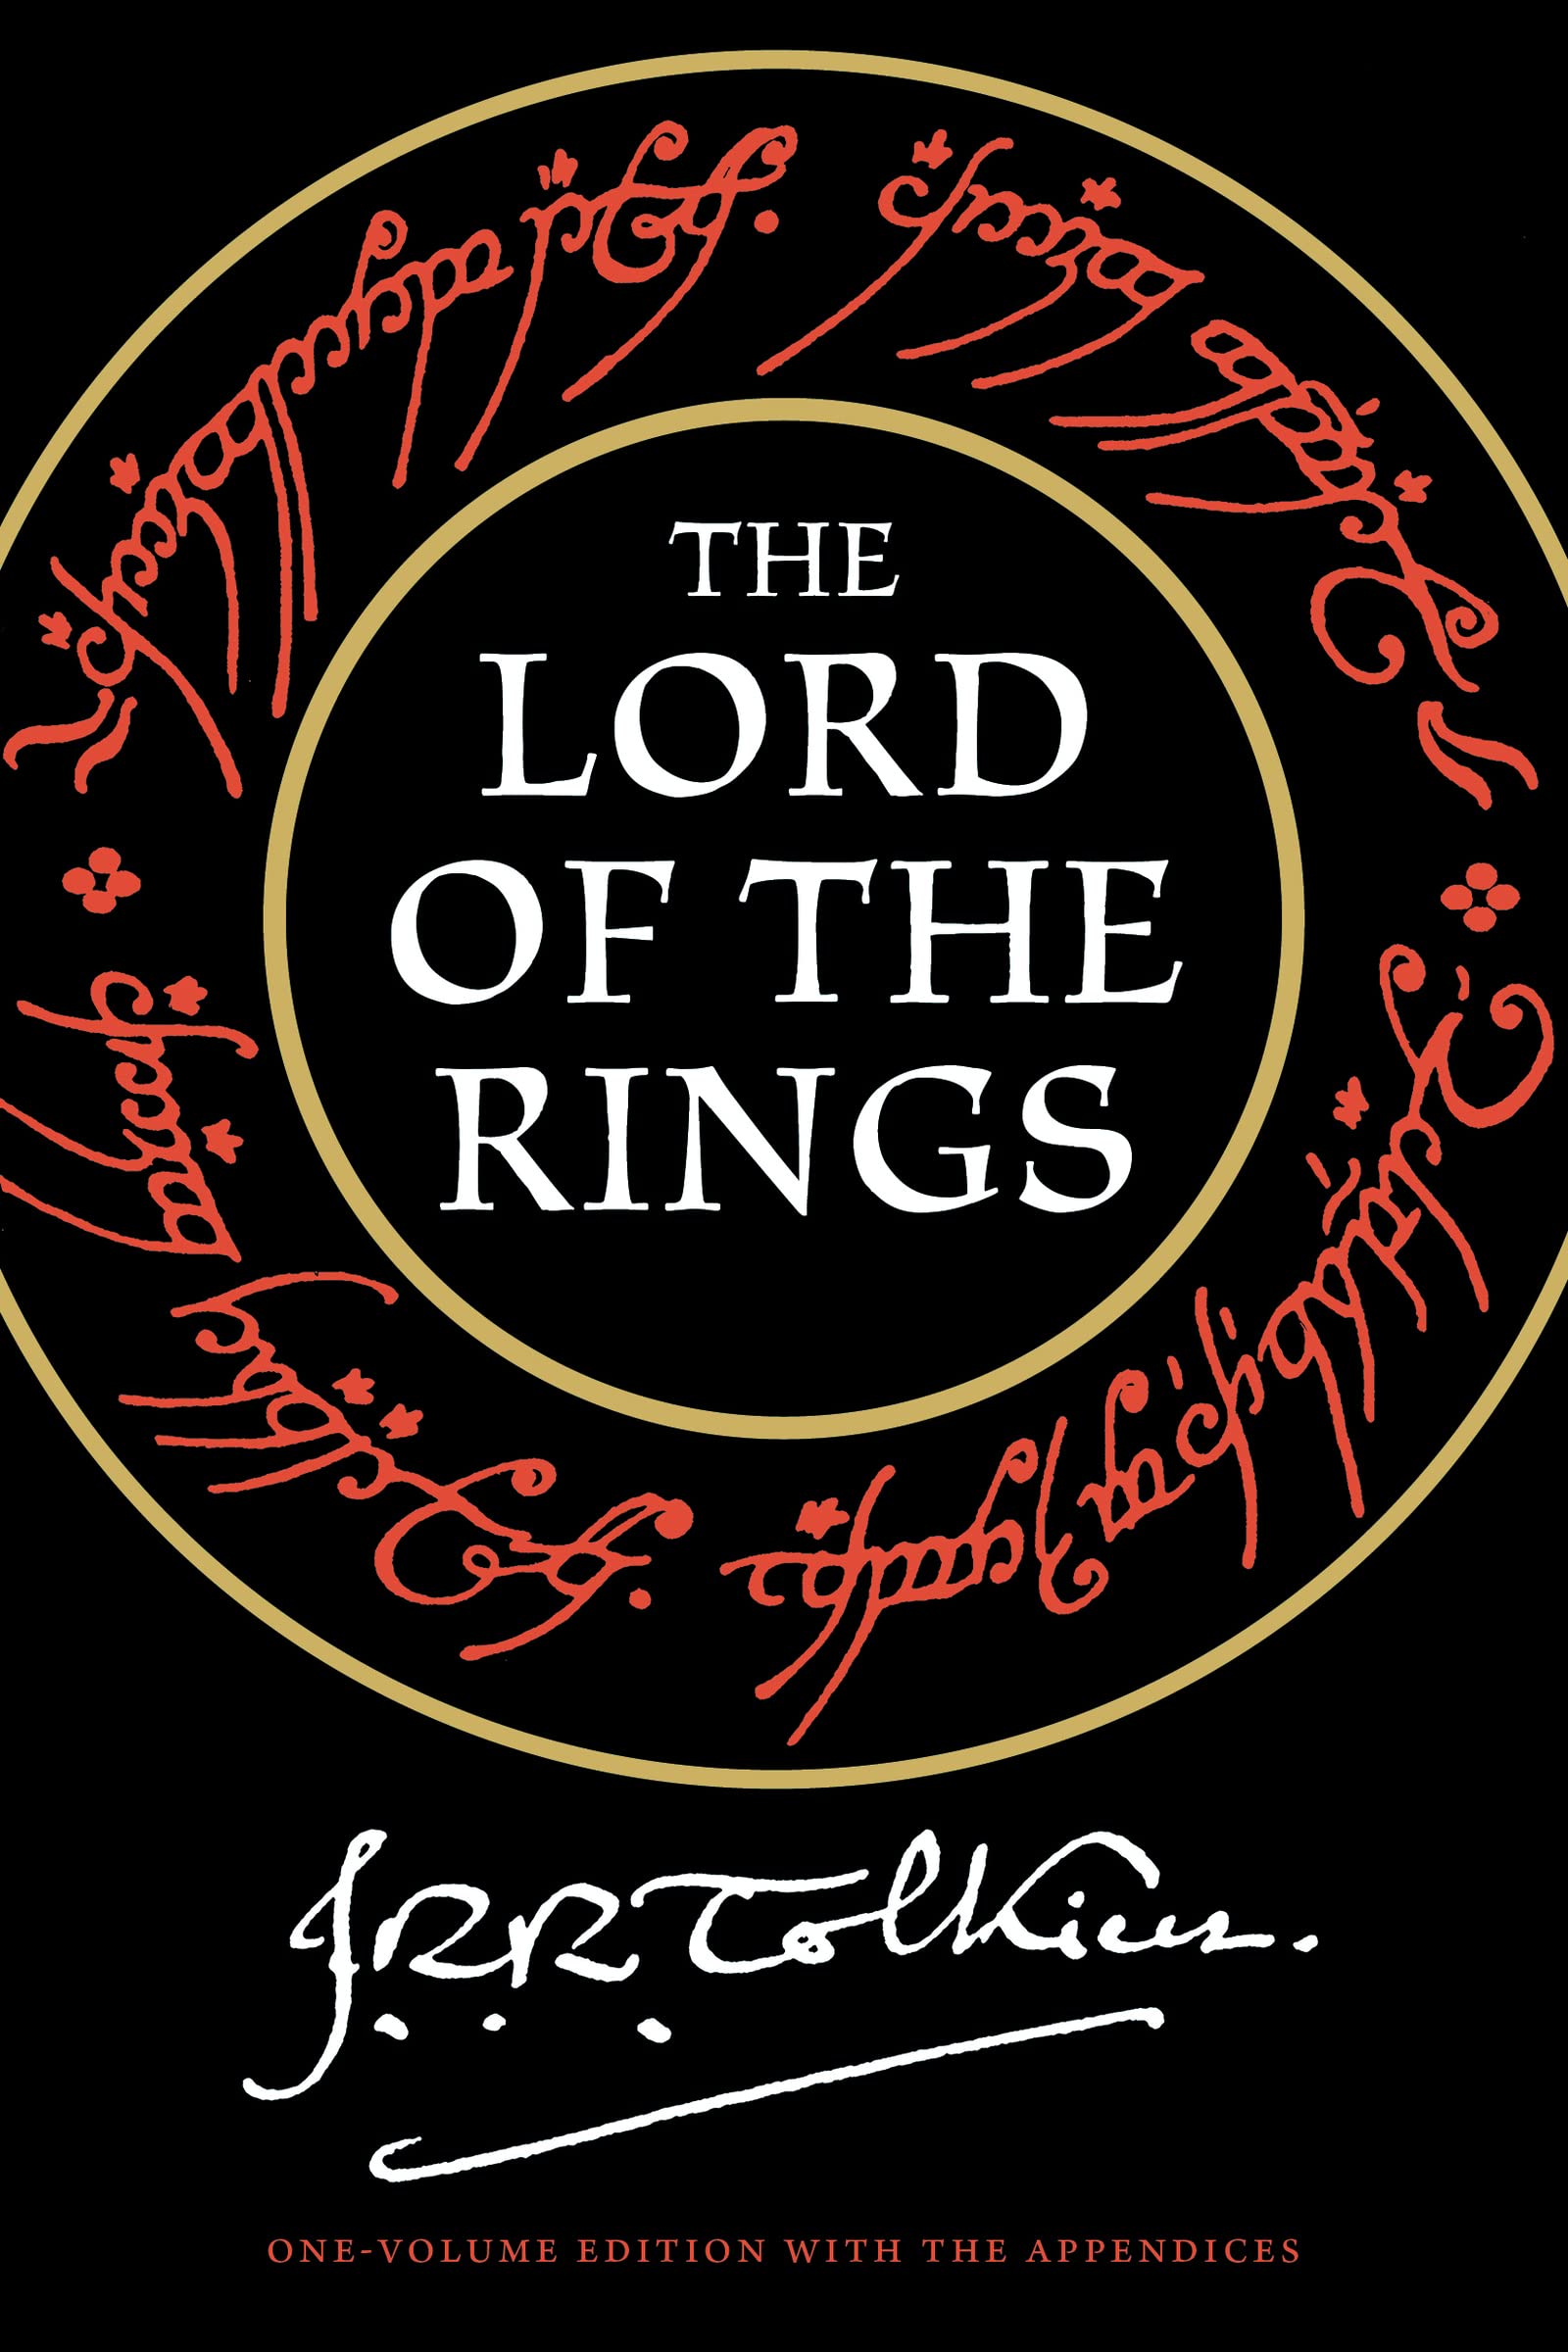 The Lord Of The Rings: One Volume (eBook) by J.R.R. Tolkien $1.99